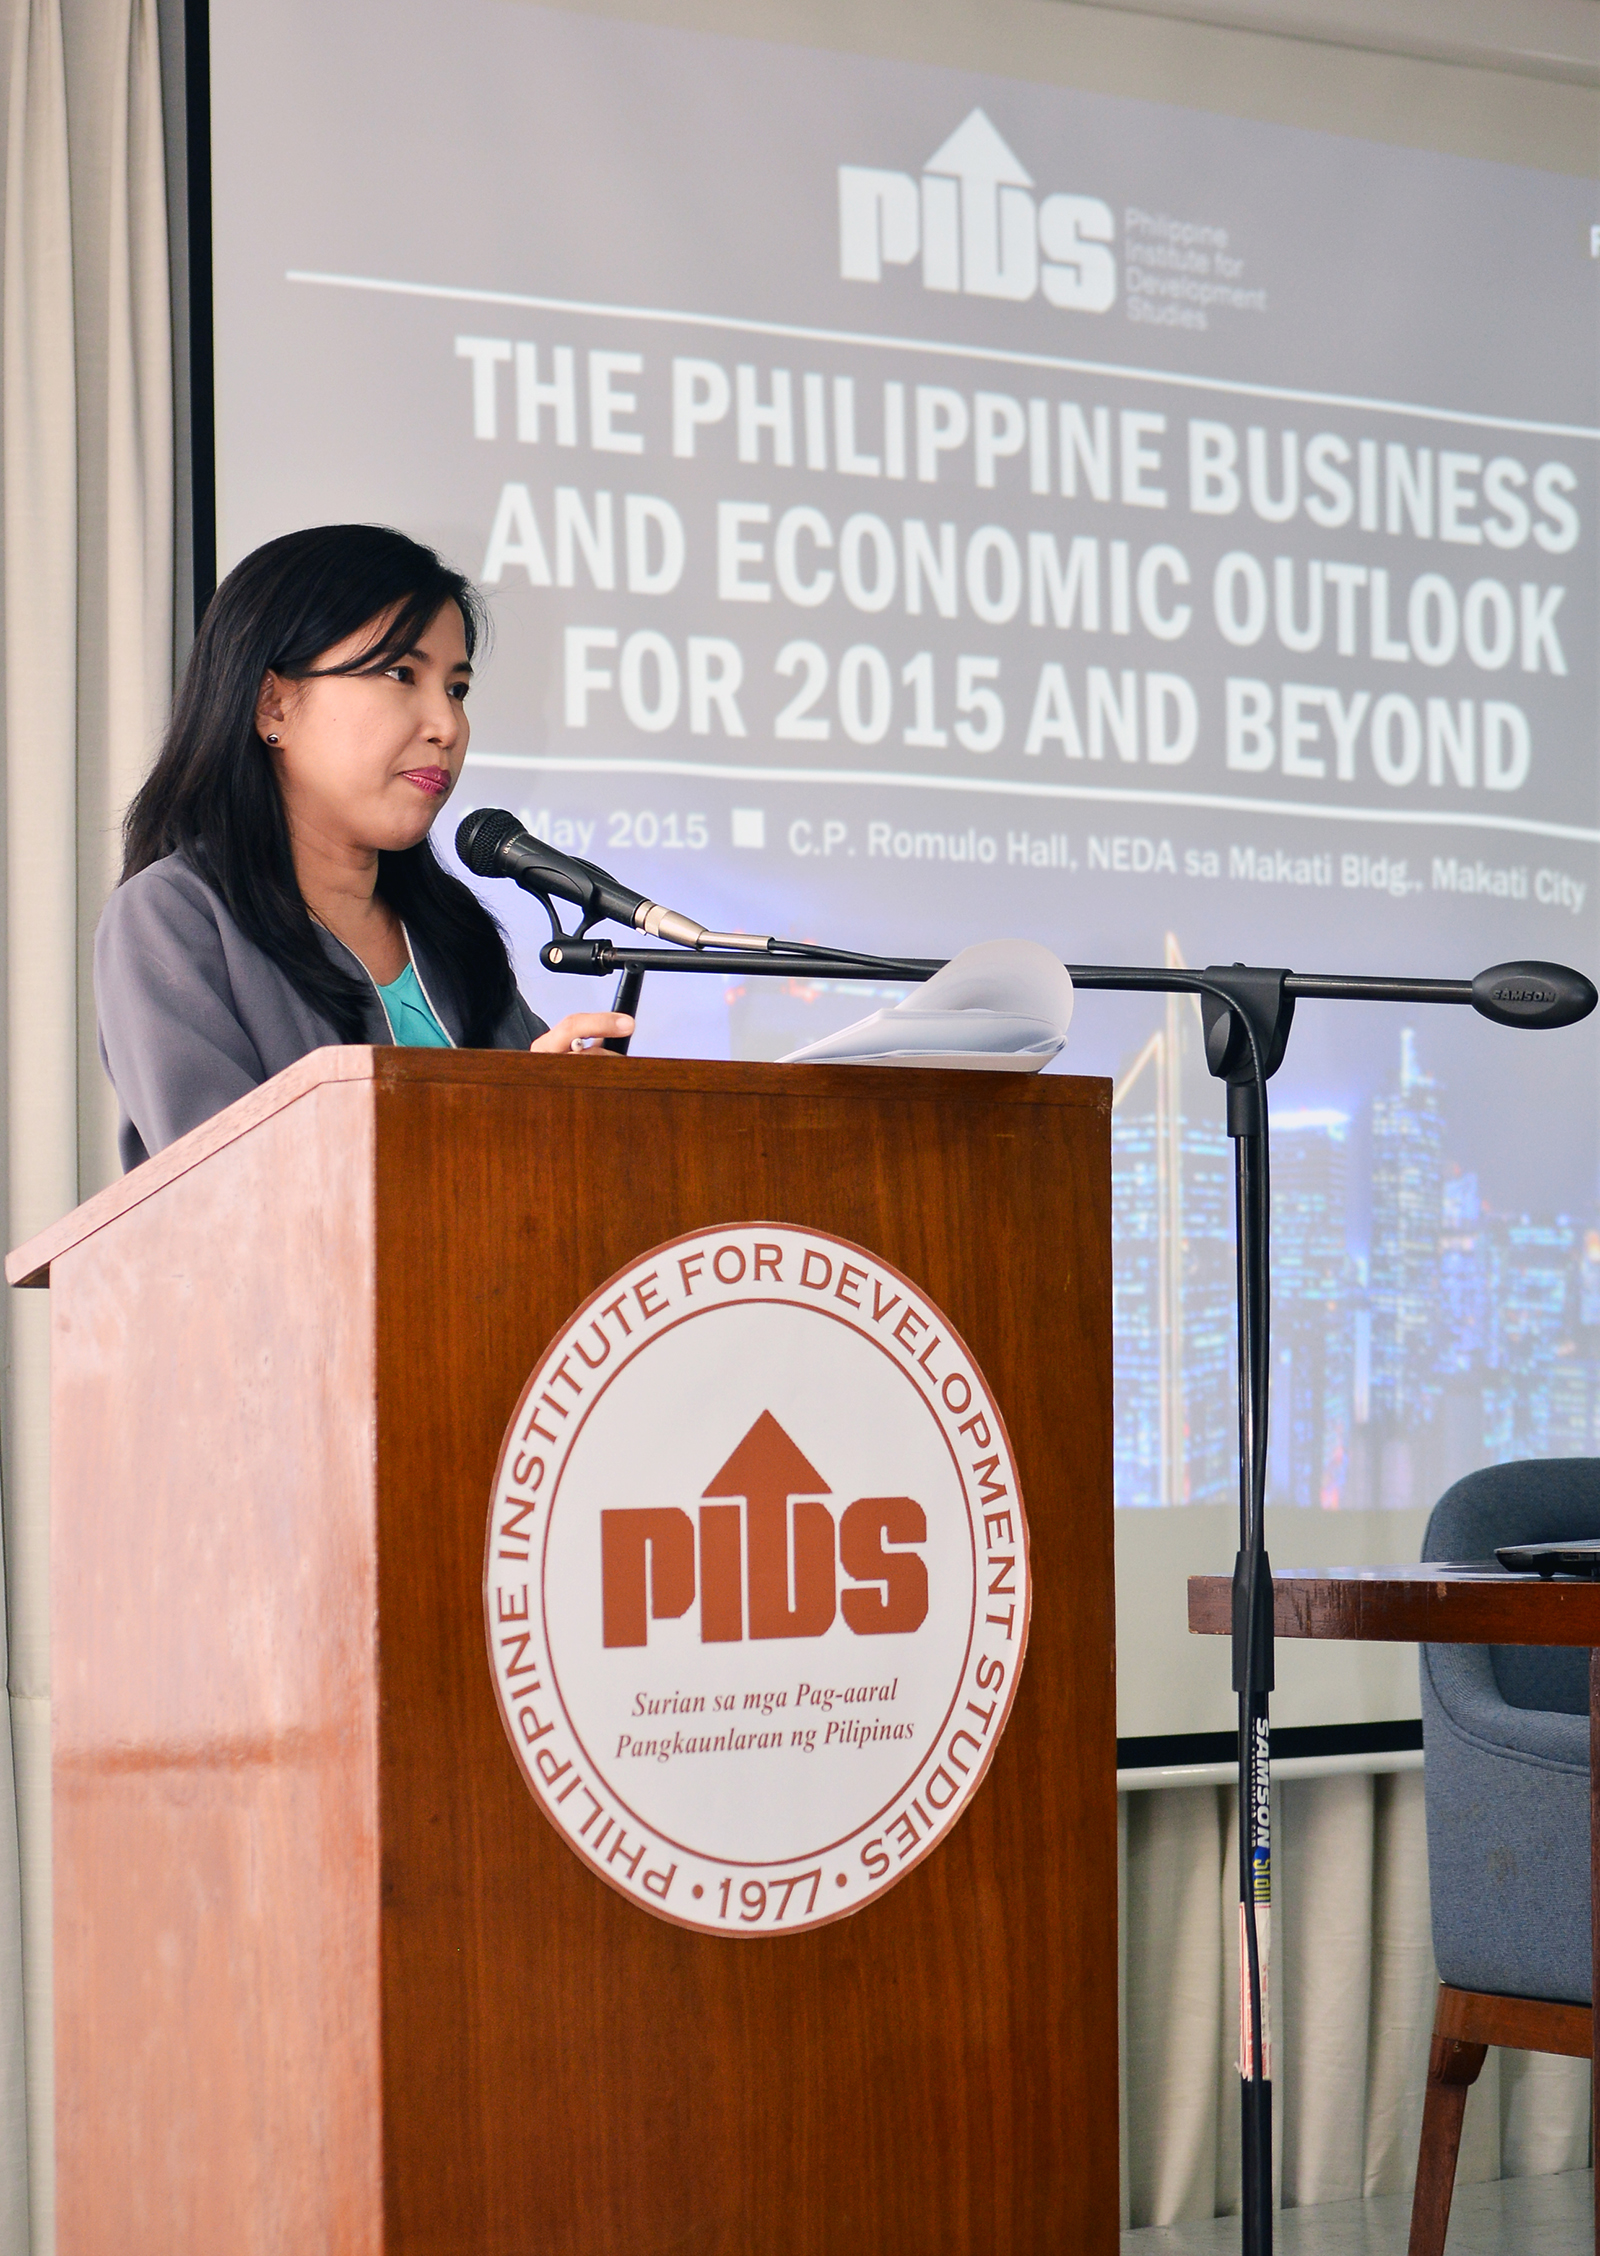 The Philippine Business and Economic Outlook for 2015 and Beyond-DSC_2864.jpg